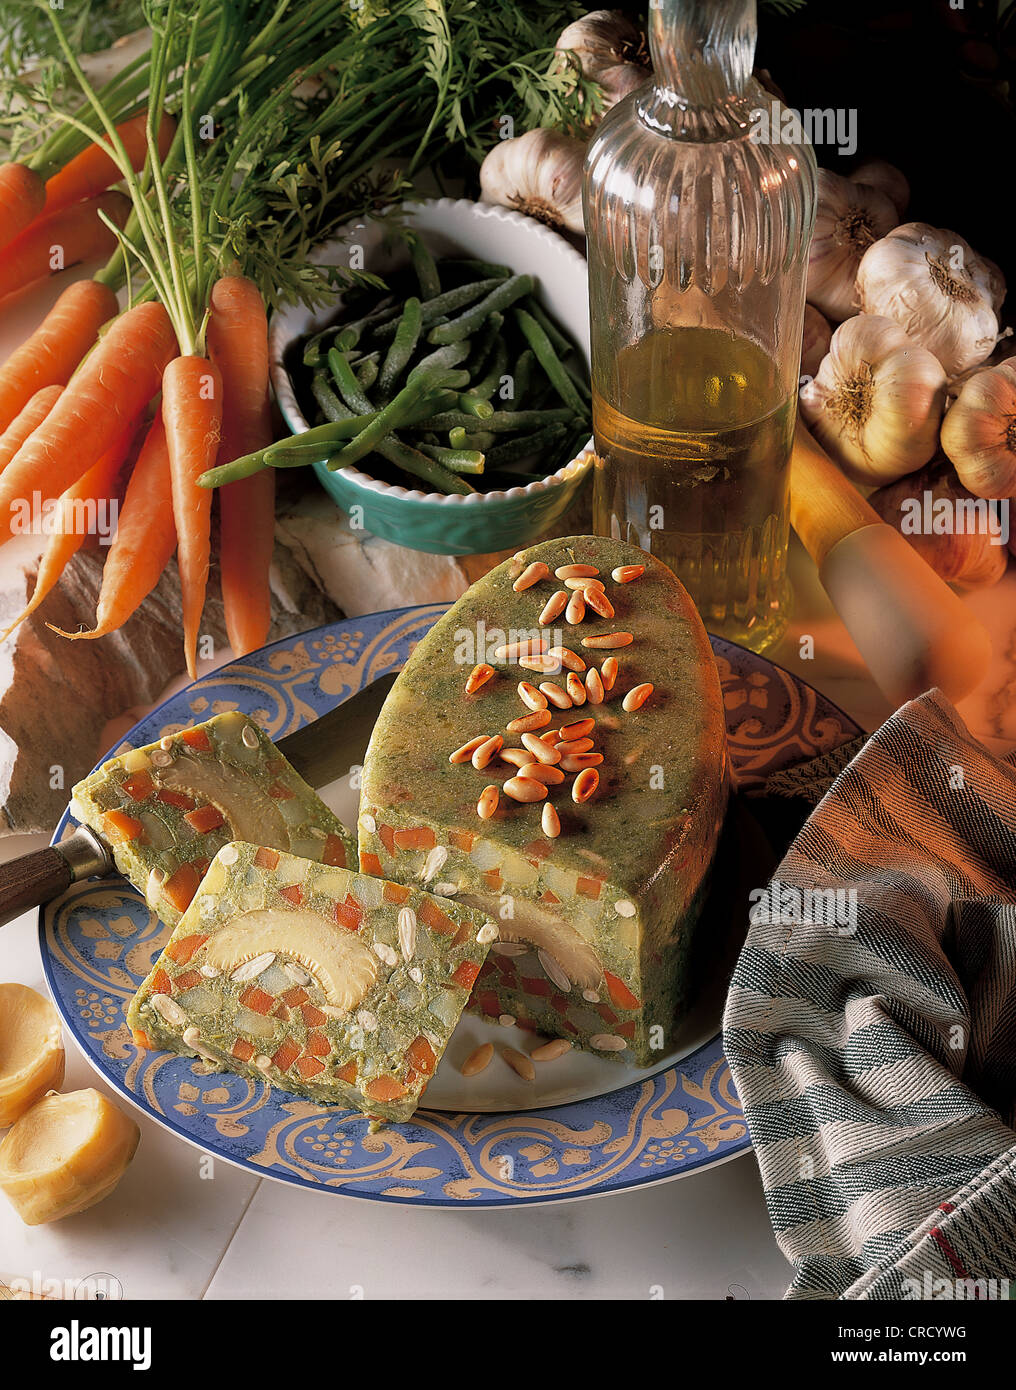 Green beans moussaka with carrots and artichoke hearts, Greece. Stock Photo